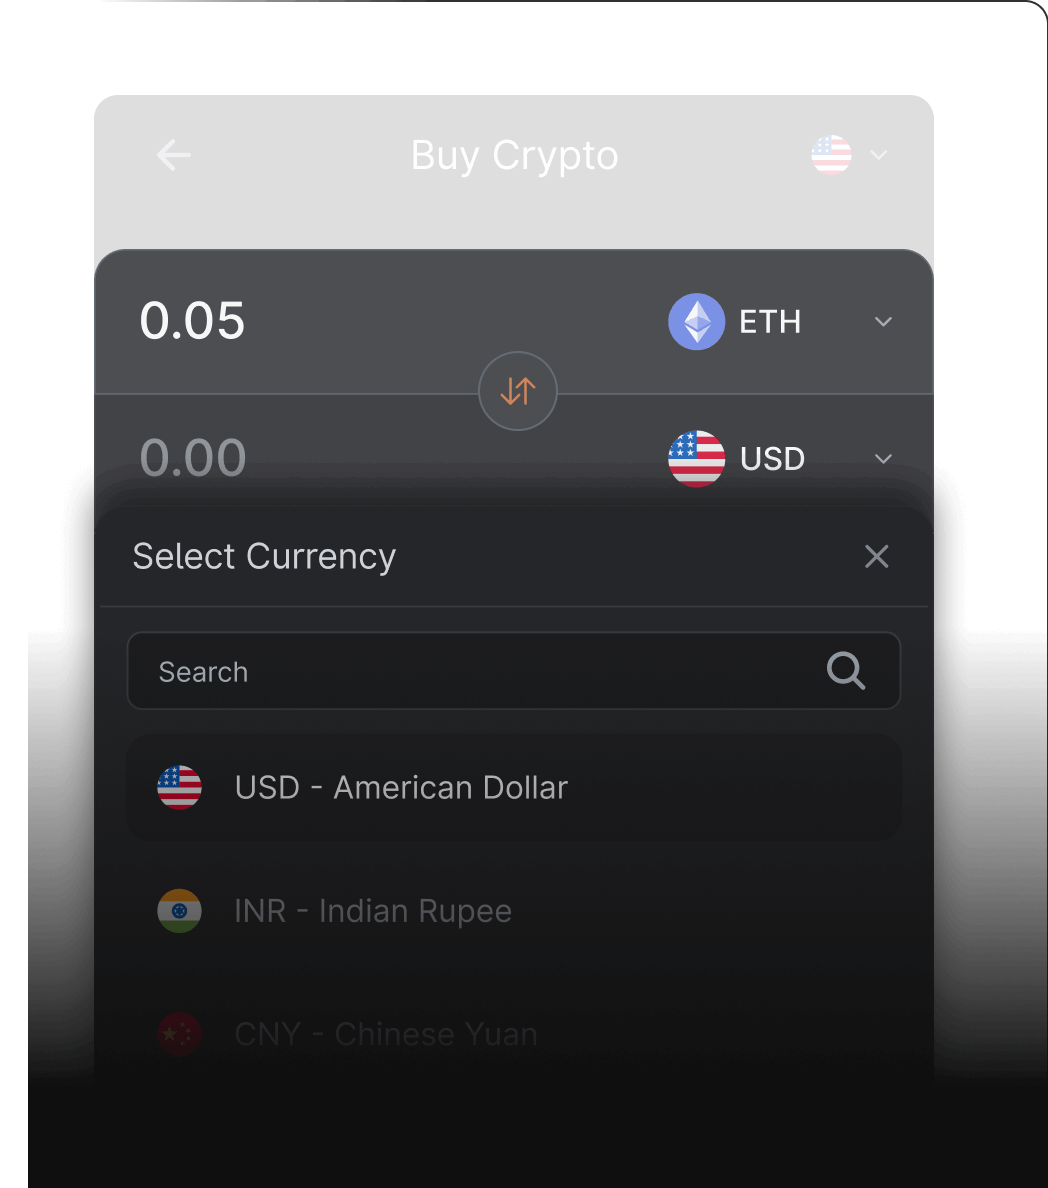 Select the currency & token